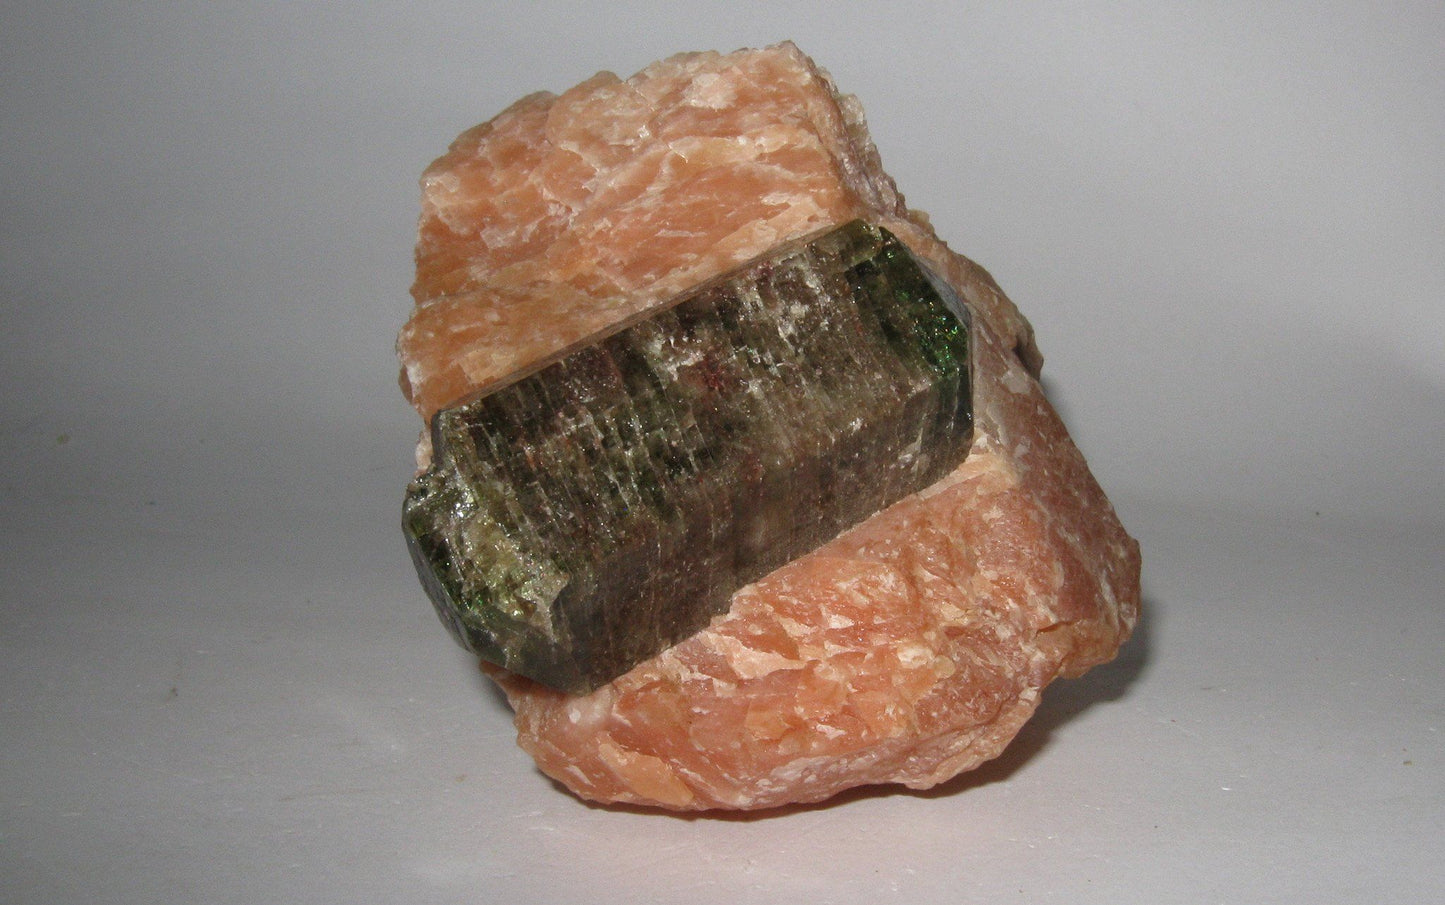 Apatite in Calcite Matrix - Yates Mine, Otter Lake, Quebec | Of Coins & Crystals